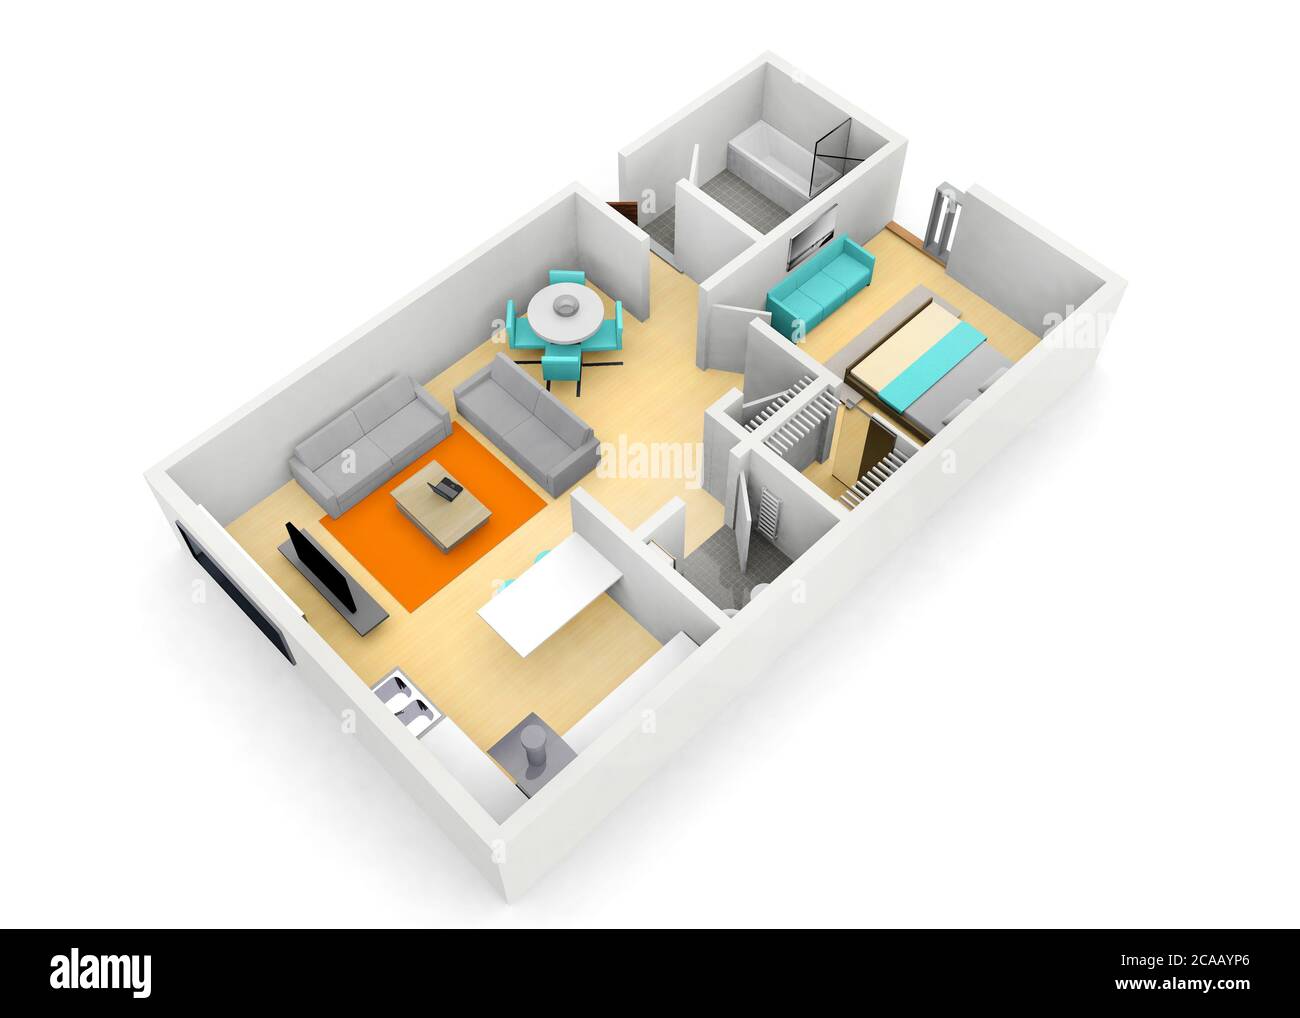 3d cgi illustration of a 1 bed modern apartment on a white background Stock Photo